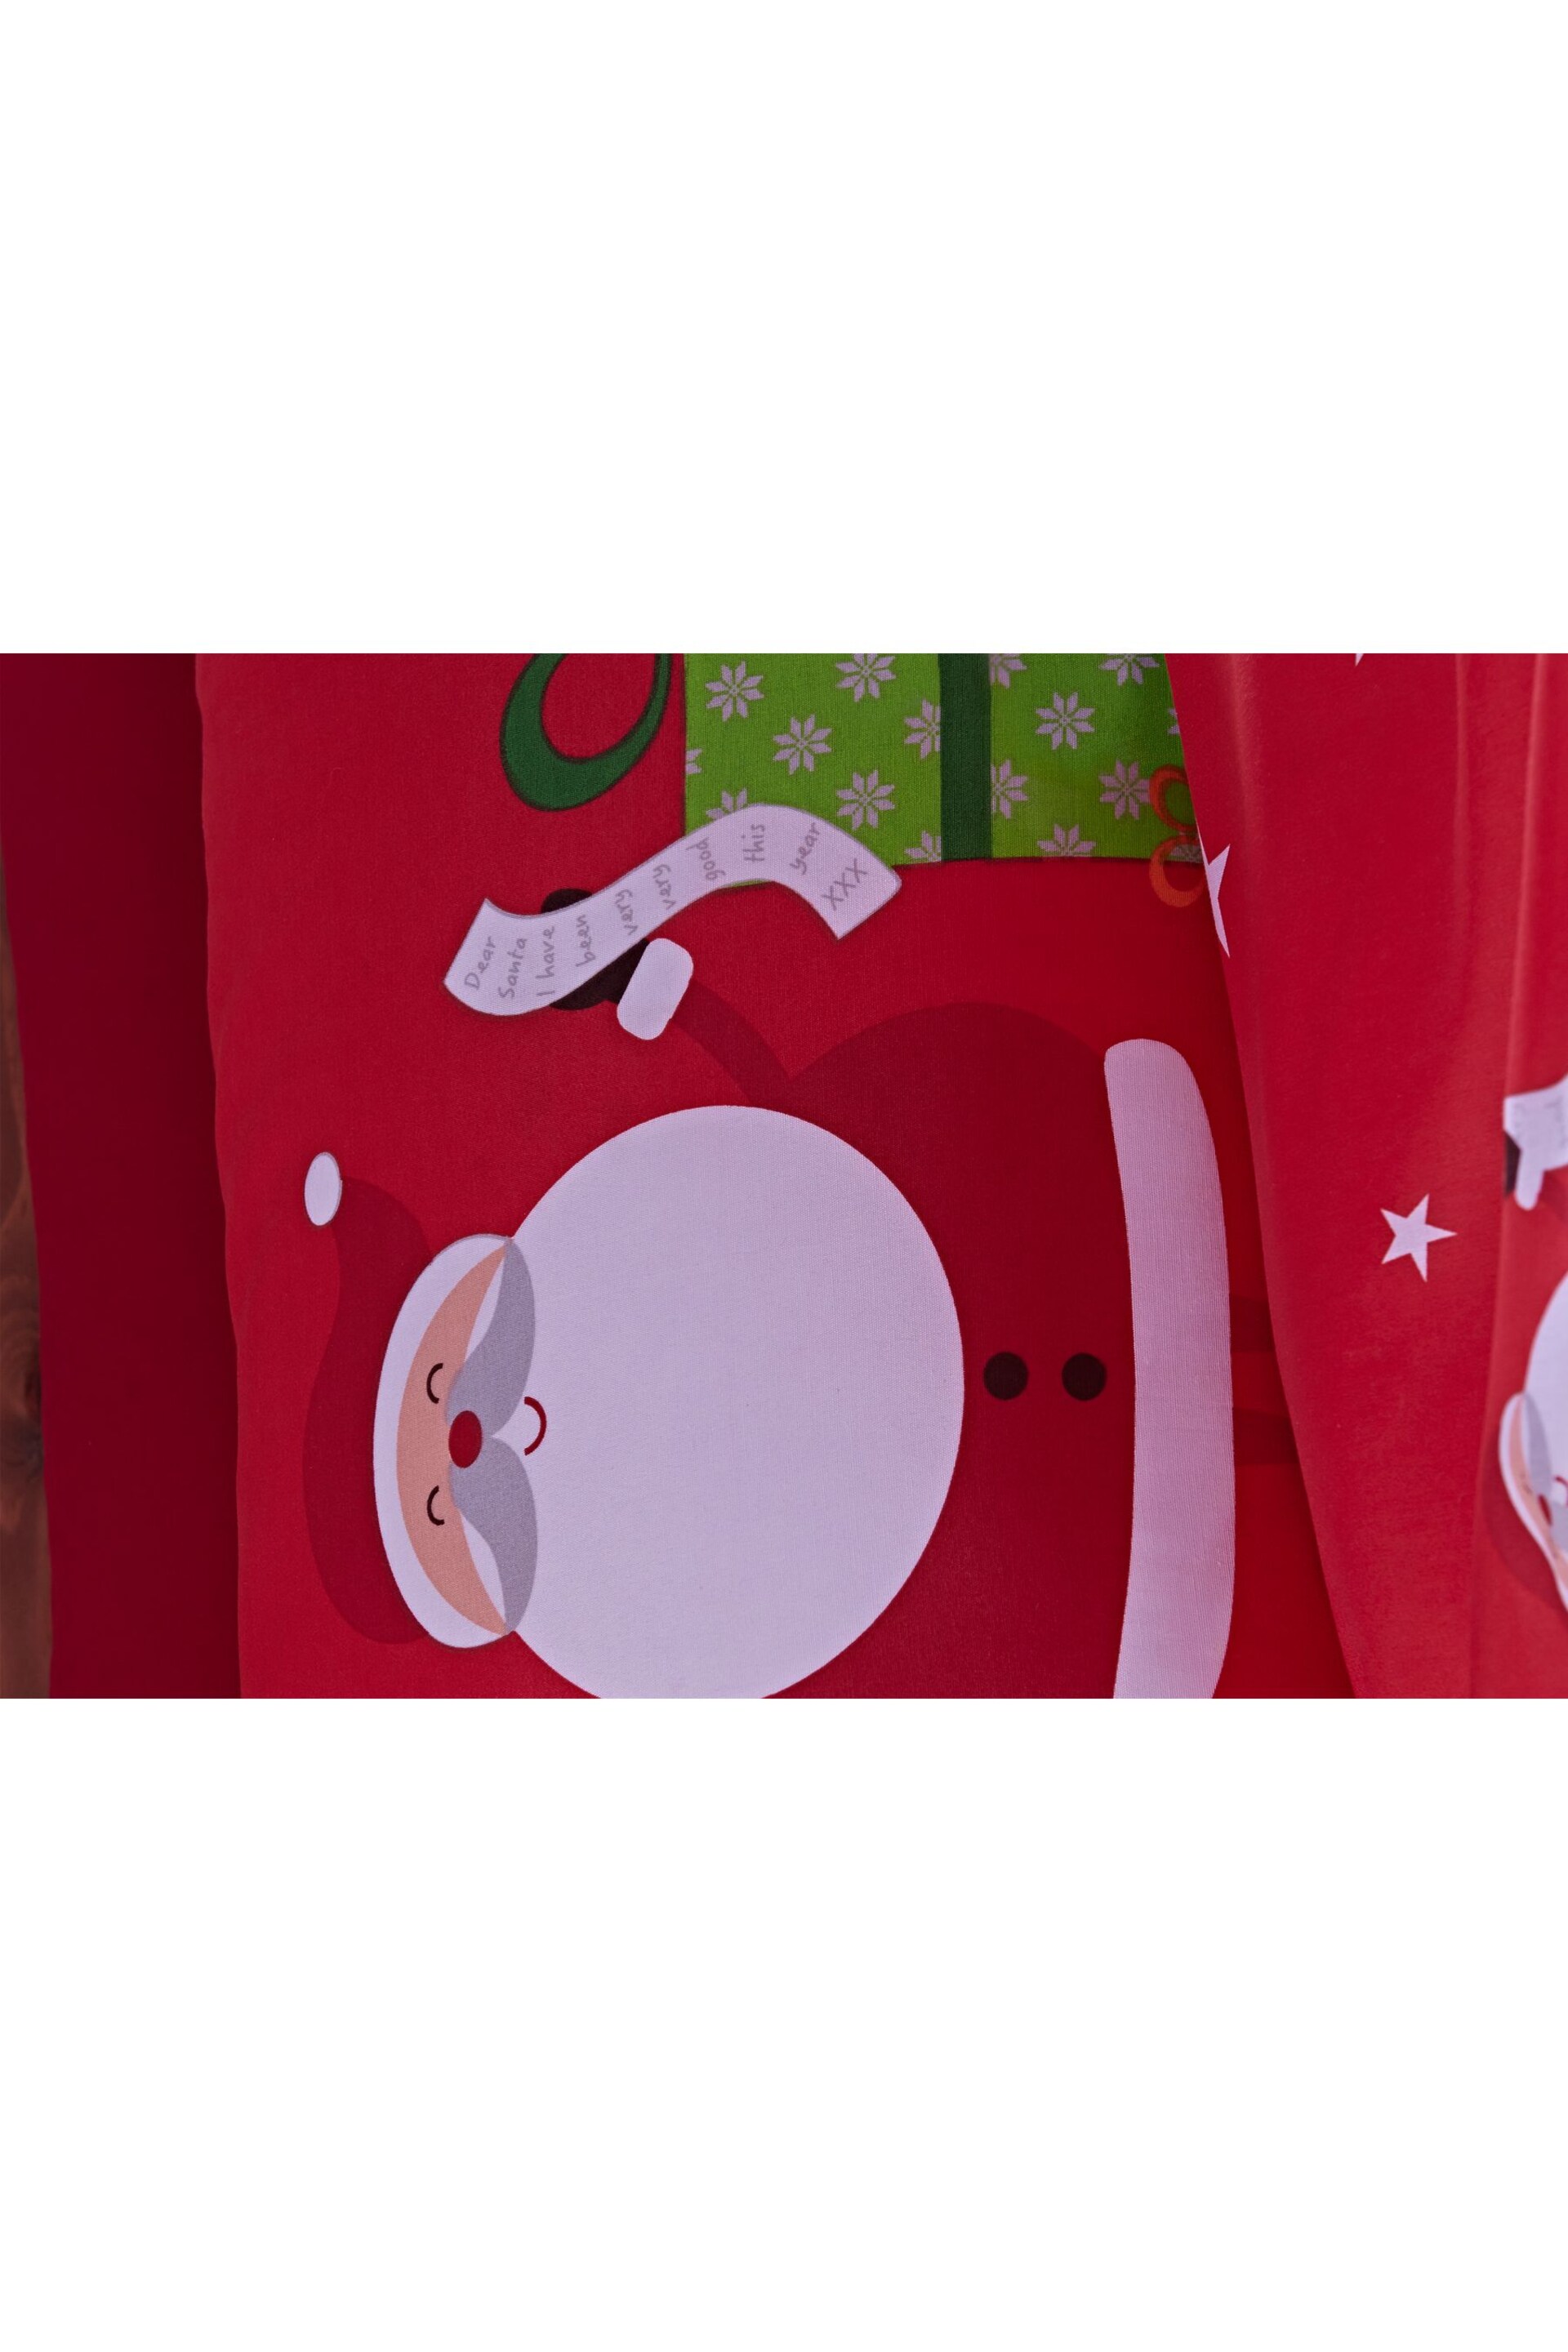 Catherine Lansfield Red Santa's Christmas Presents Duvet Cover and Pillowcase Set - Image 3 of 3